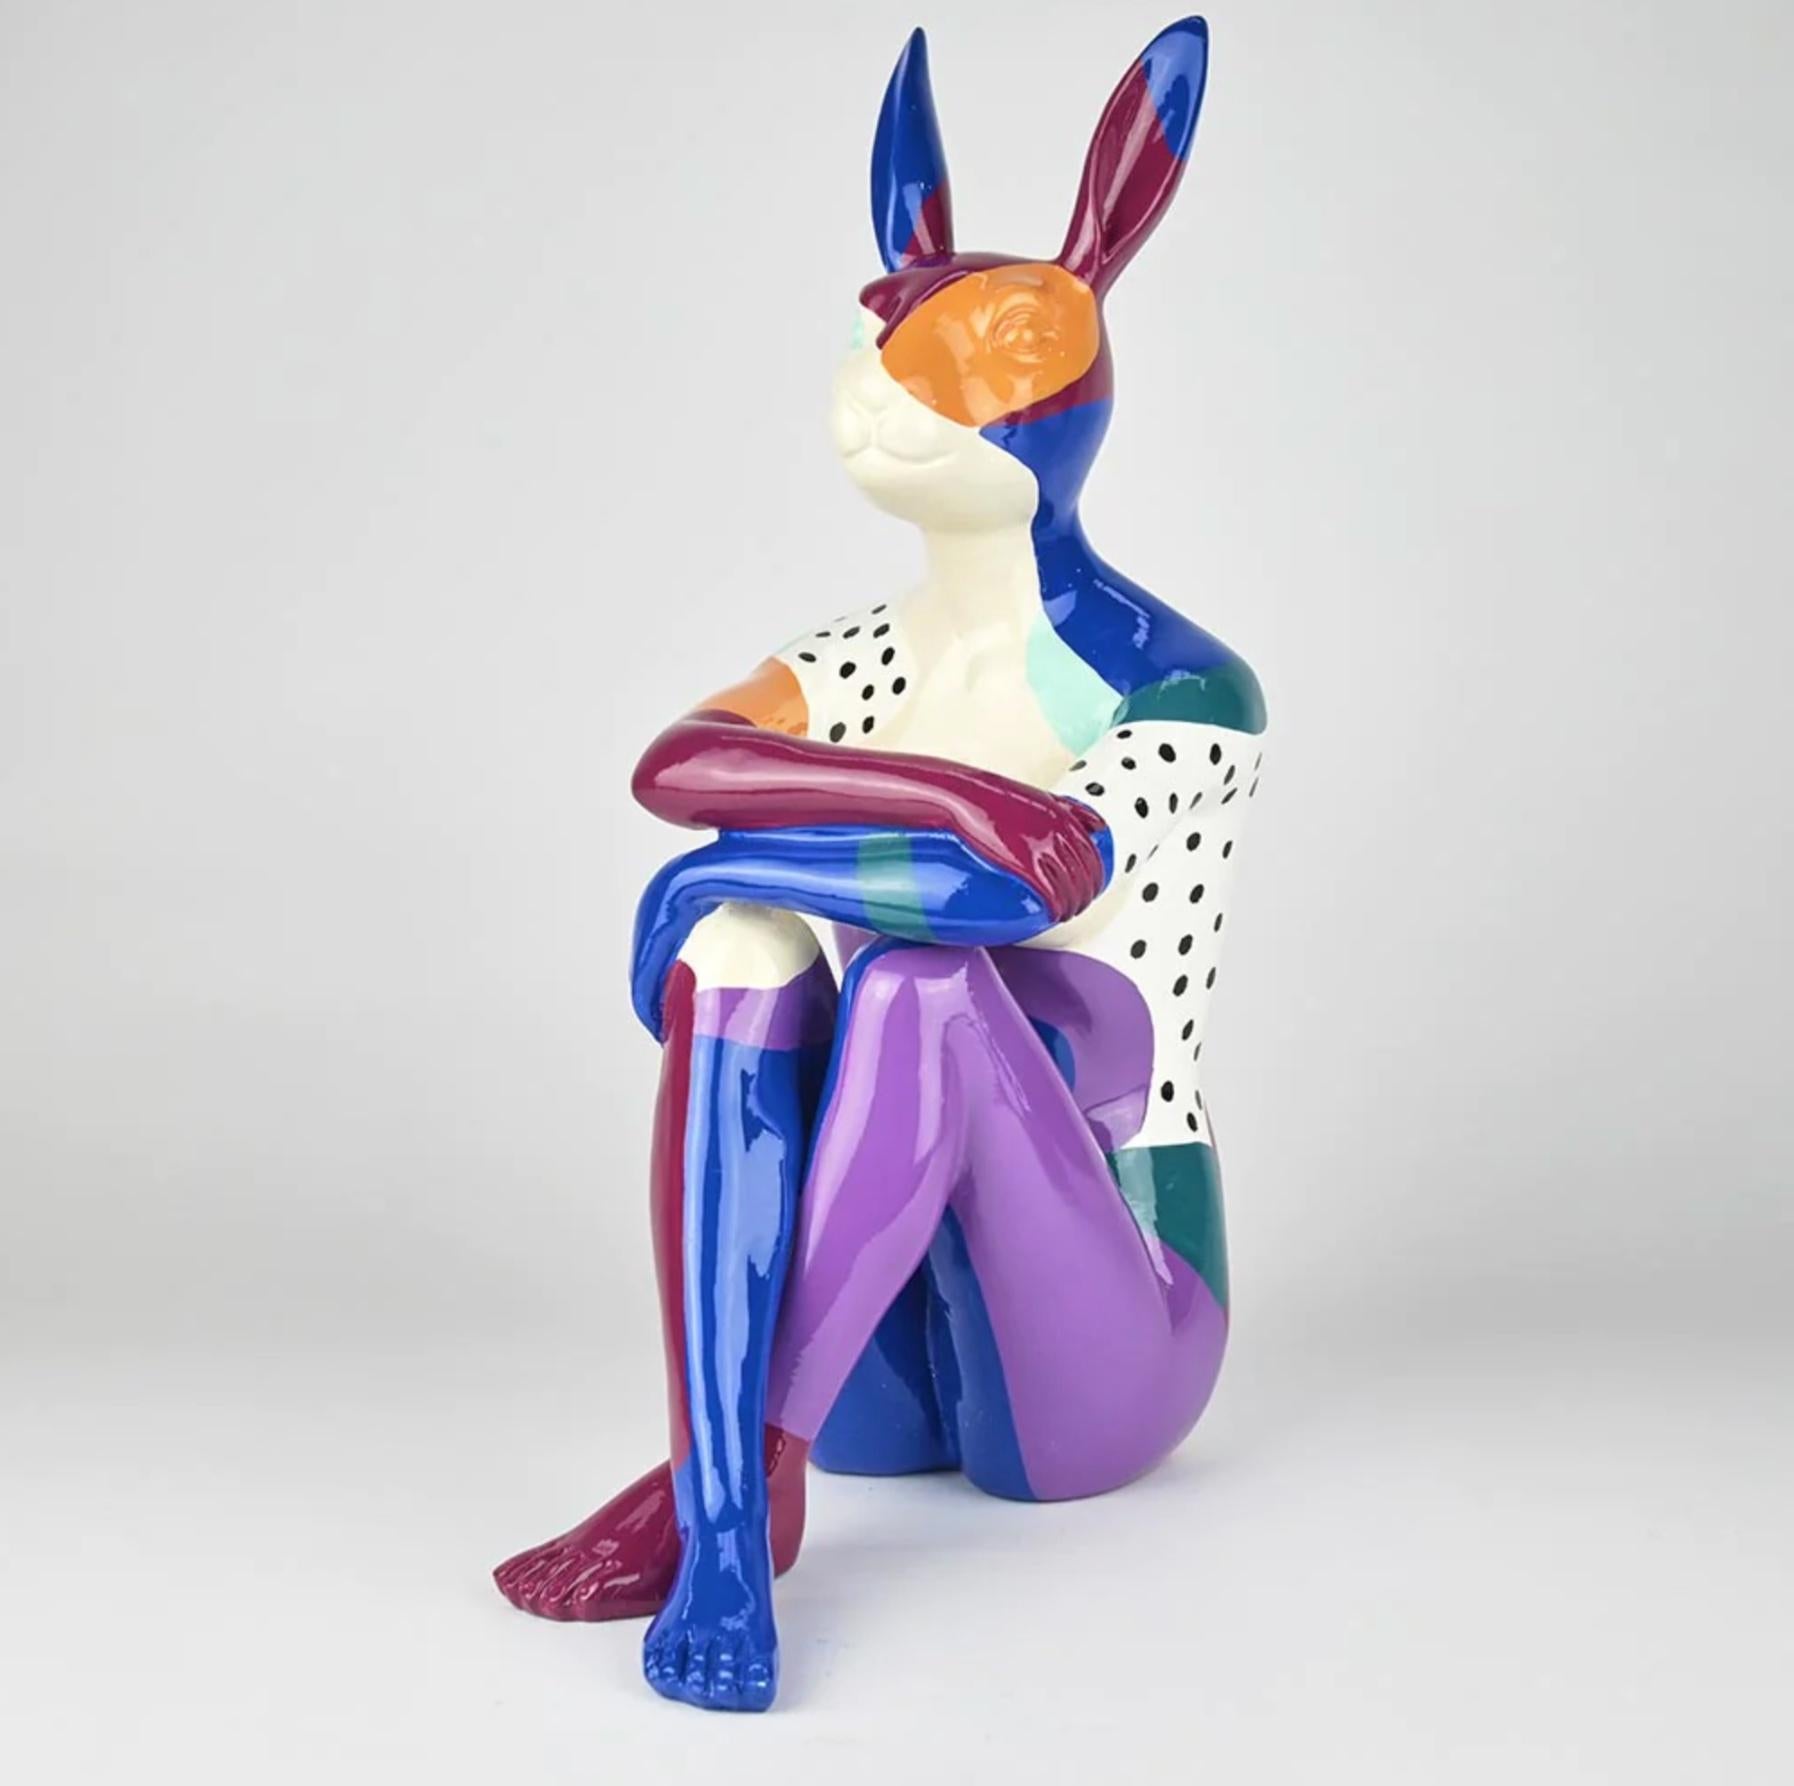 Gillie and Marc Schattner Figurative Sculpture - Authentic Resin Splash Pop City Bunny Sculpture by Gillie and Marc 